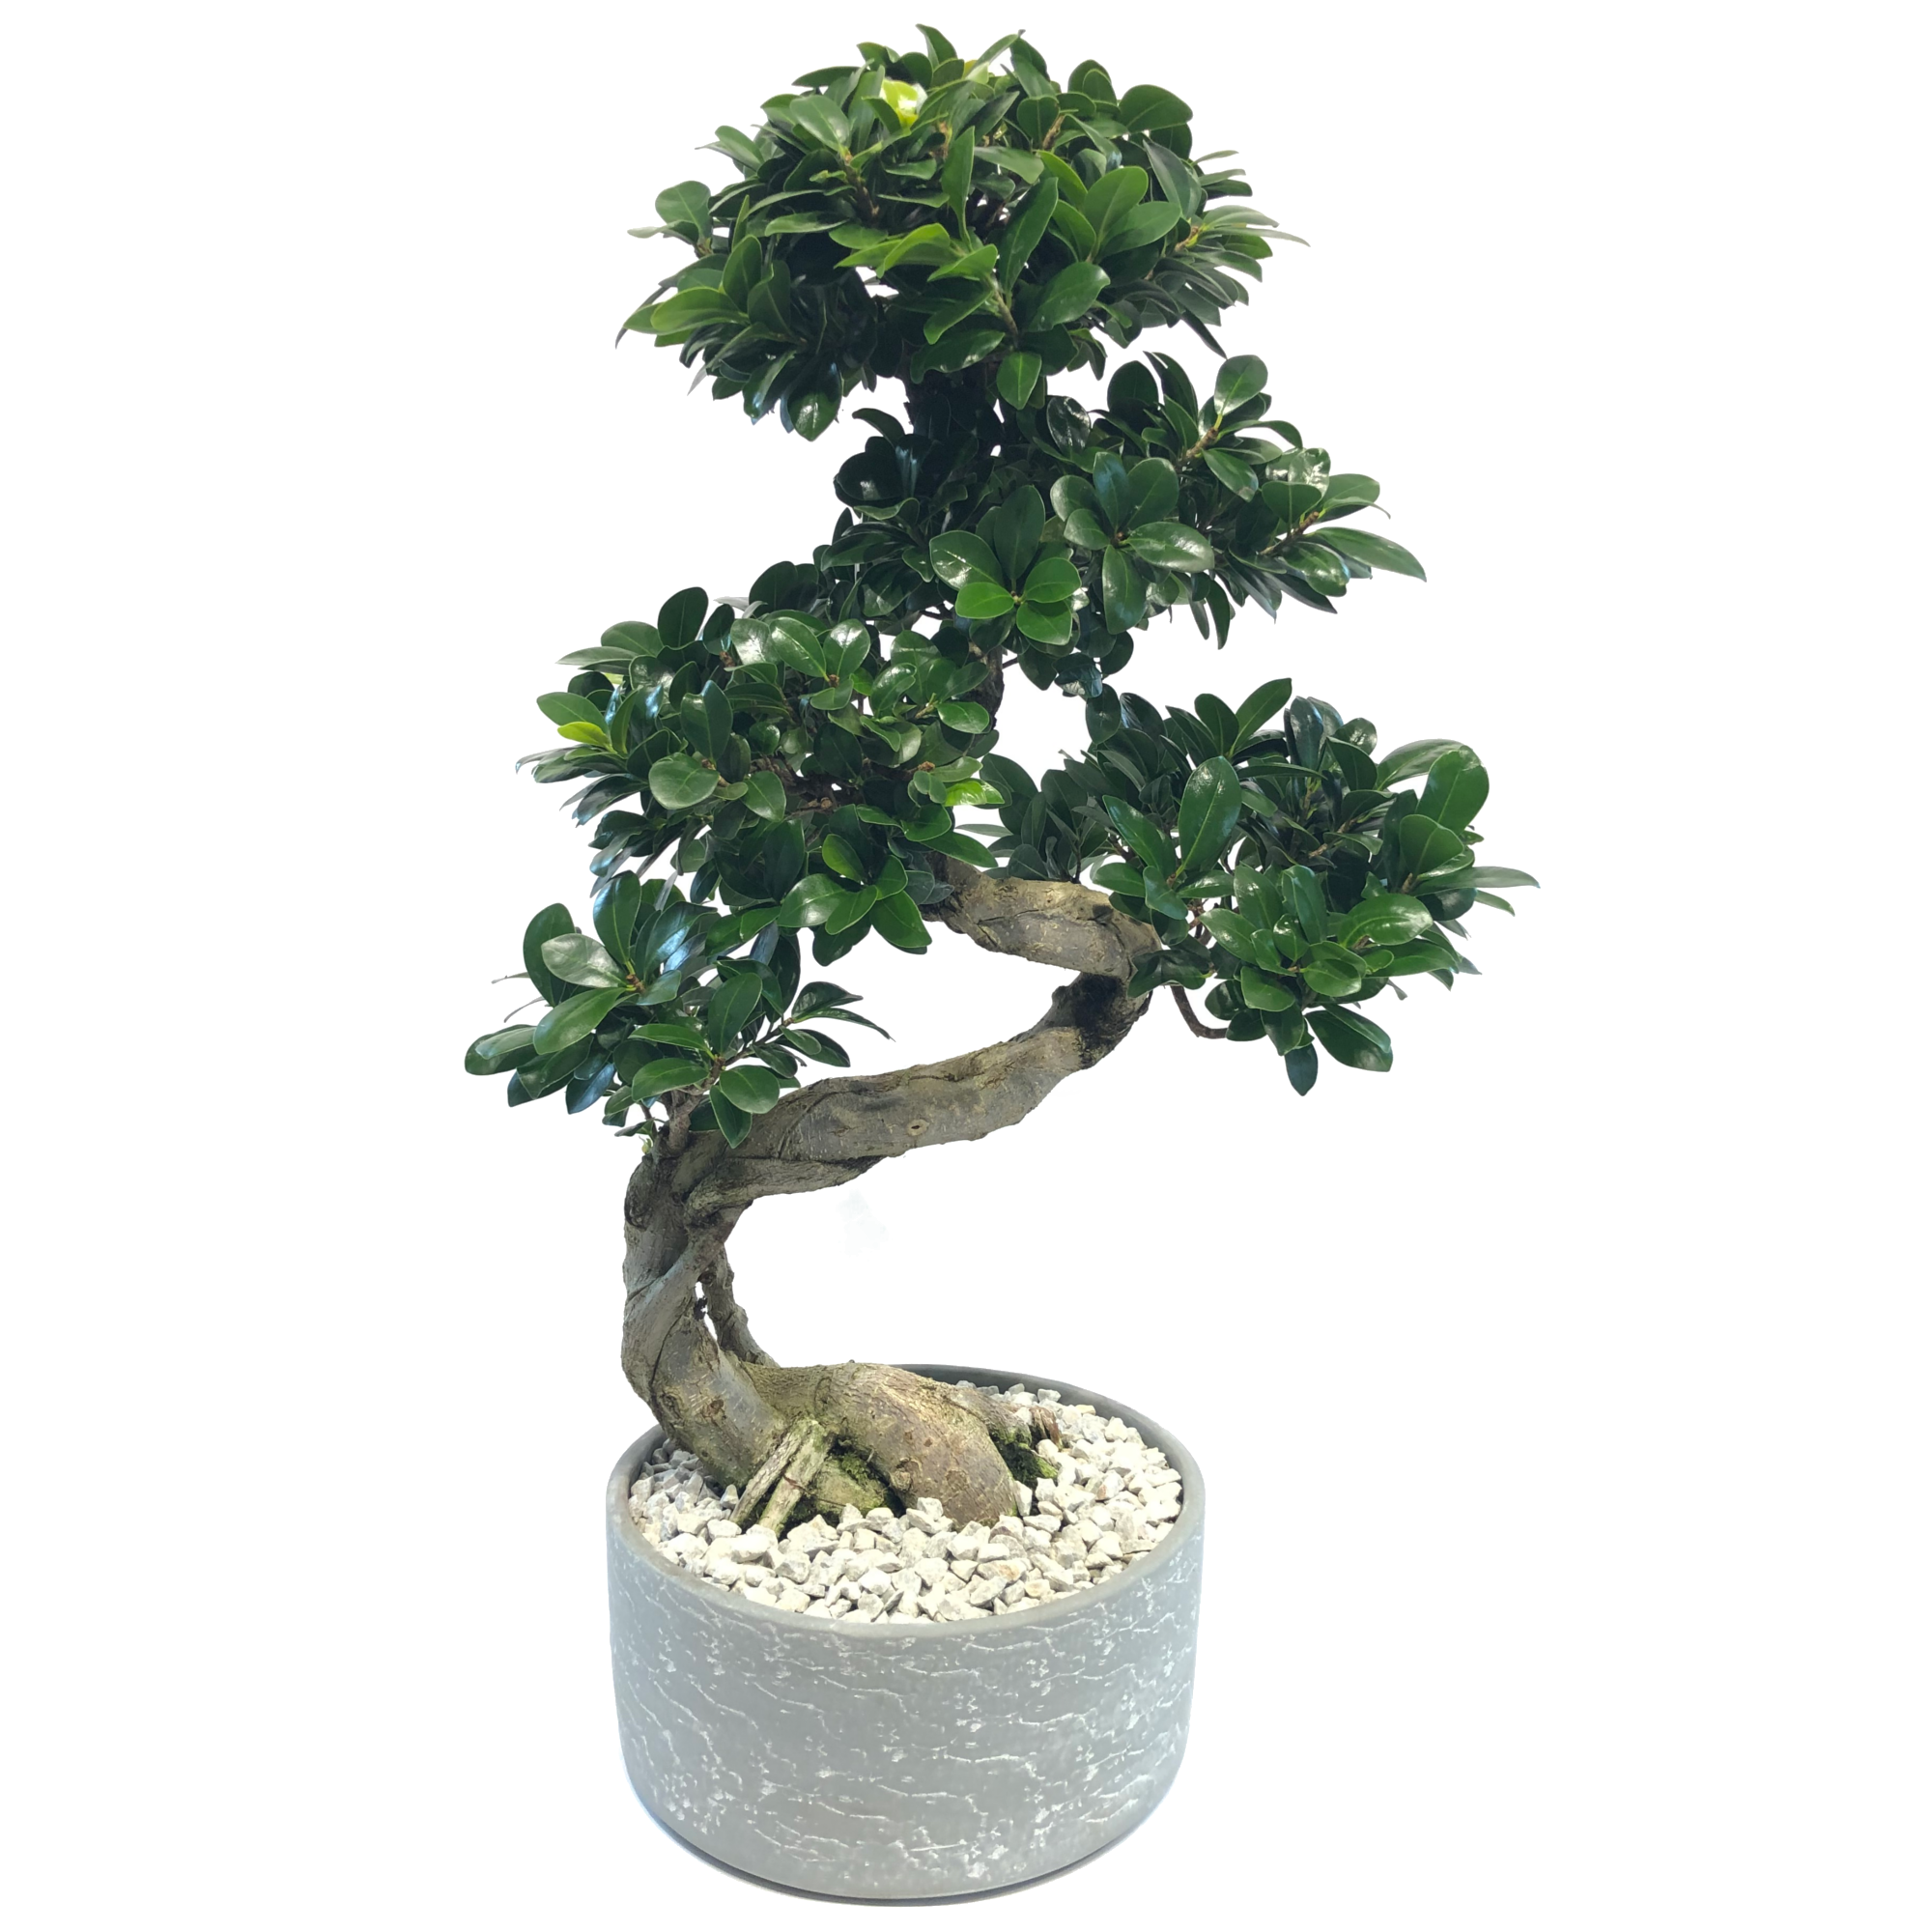 Zimmerbonsai Ficus 'Ginseng' S-Form in Schale grau 24 cm + product picture